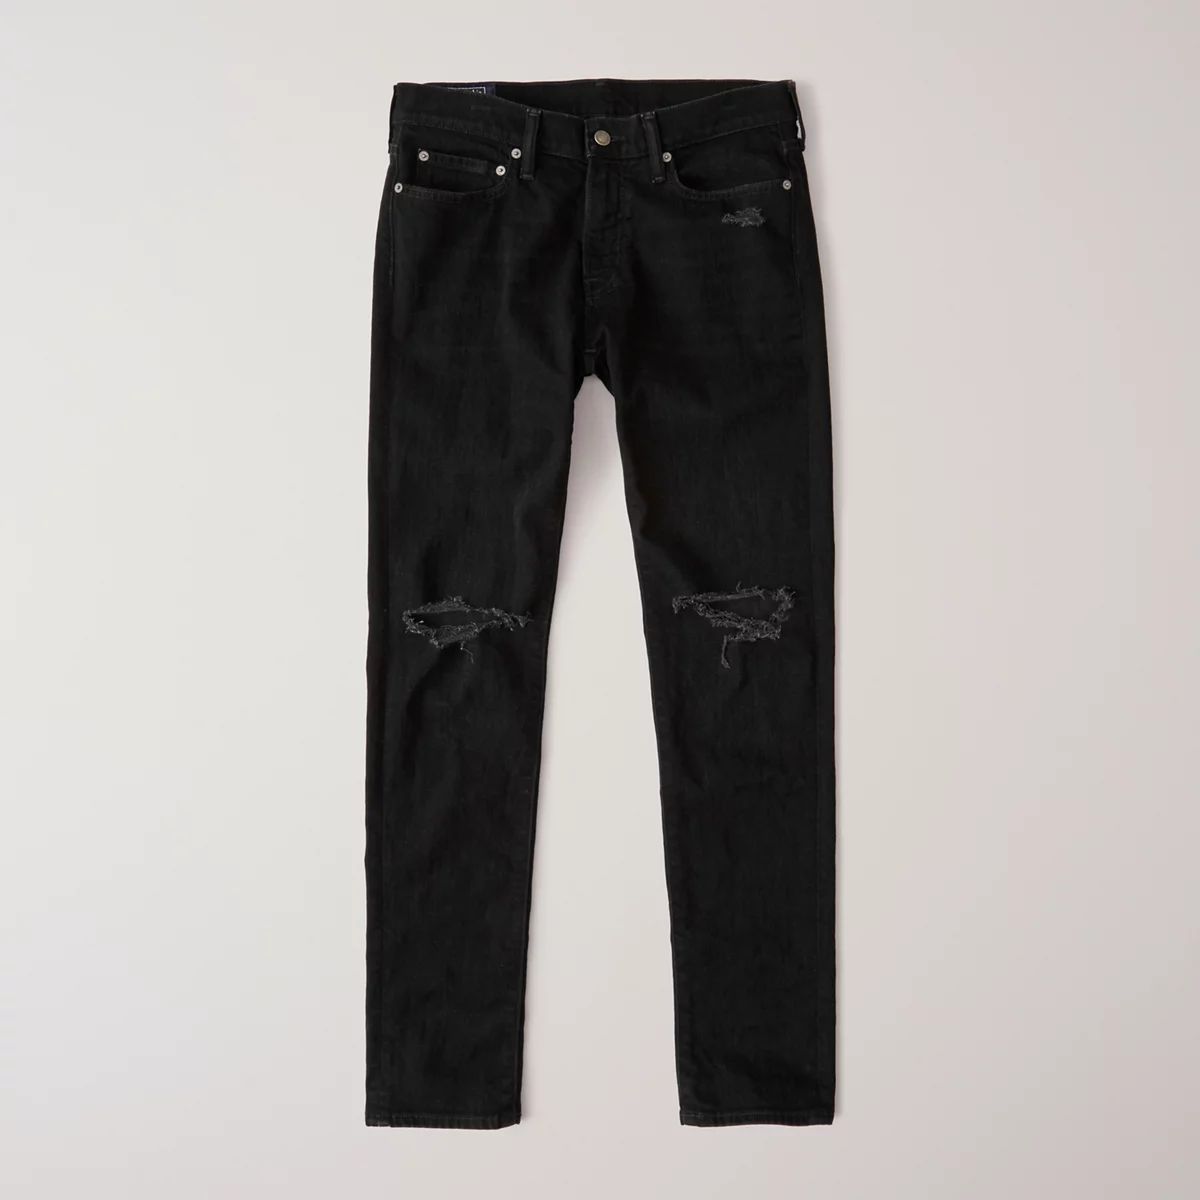 Ripped Super Skinny Jeans | Abercrombie & Fitch US & UK